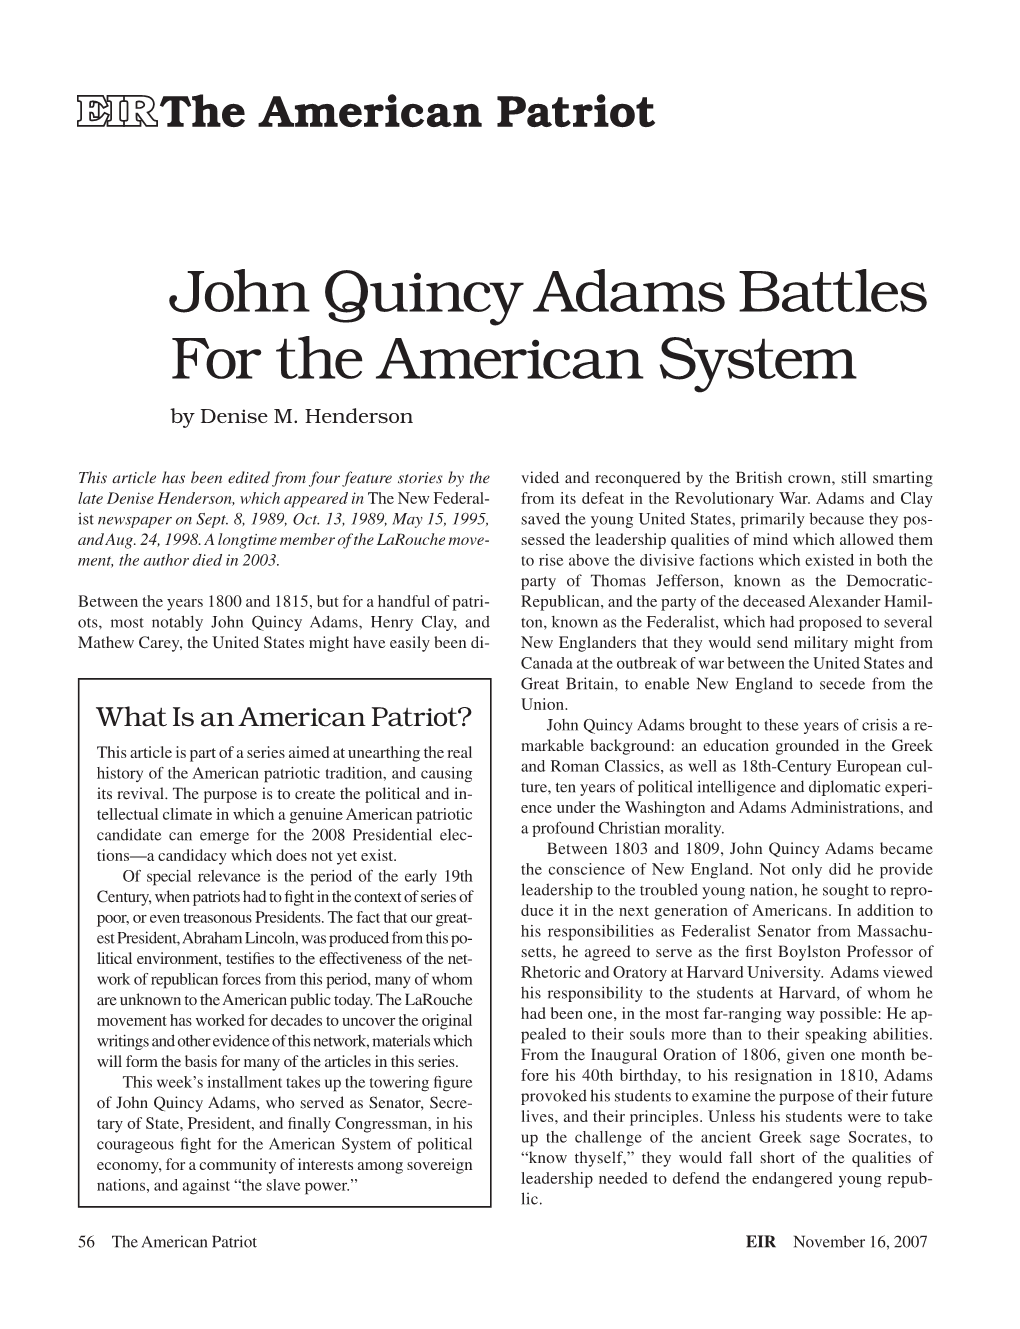 John Quincy Adams Battles for the American System by Denise M